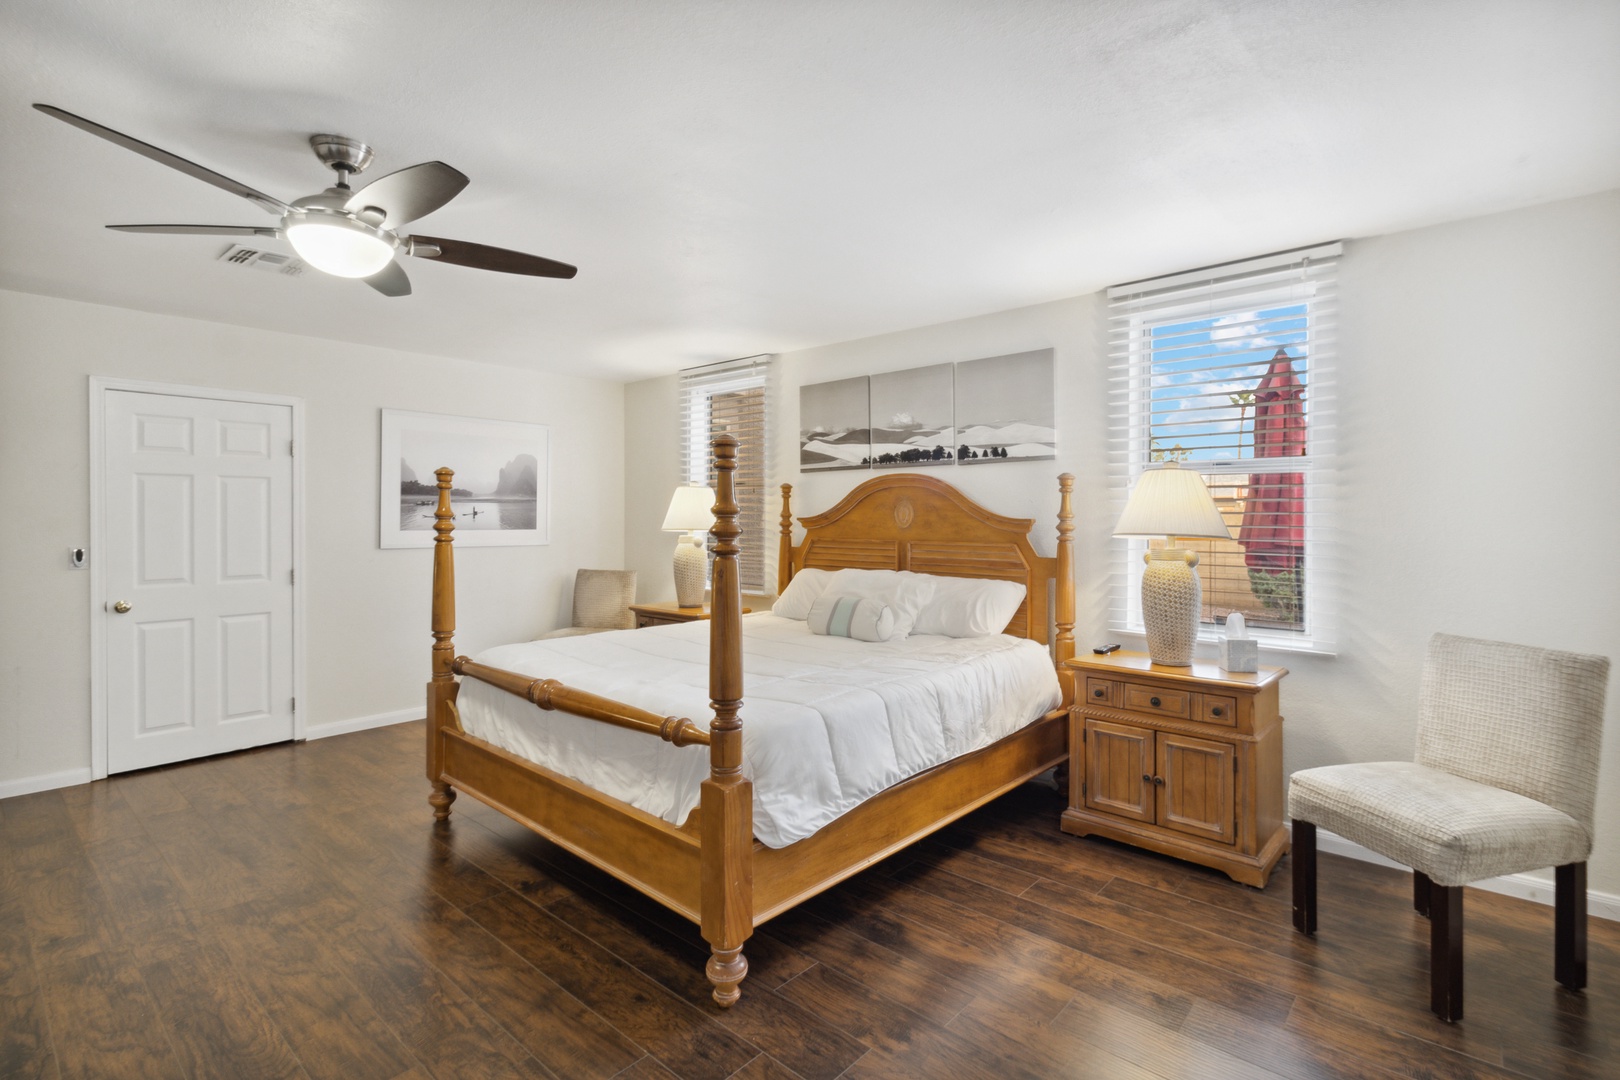 Scottsdale Vacation Rentals, OFB Thunderbird Retreat - Bedroom with King bed off living room